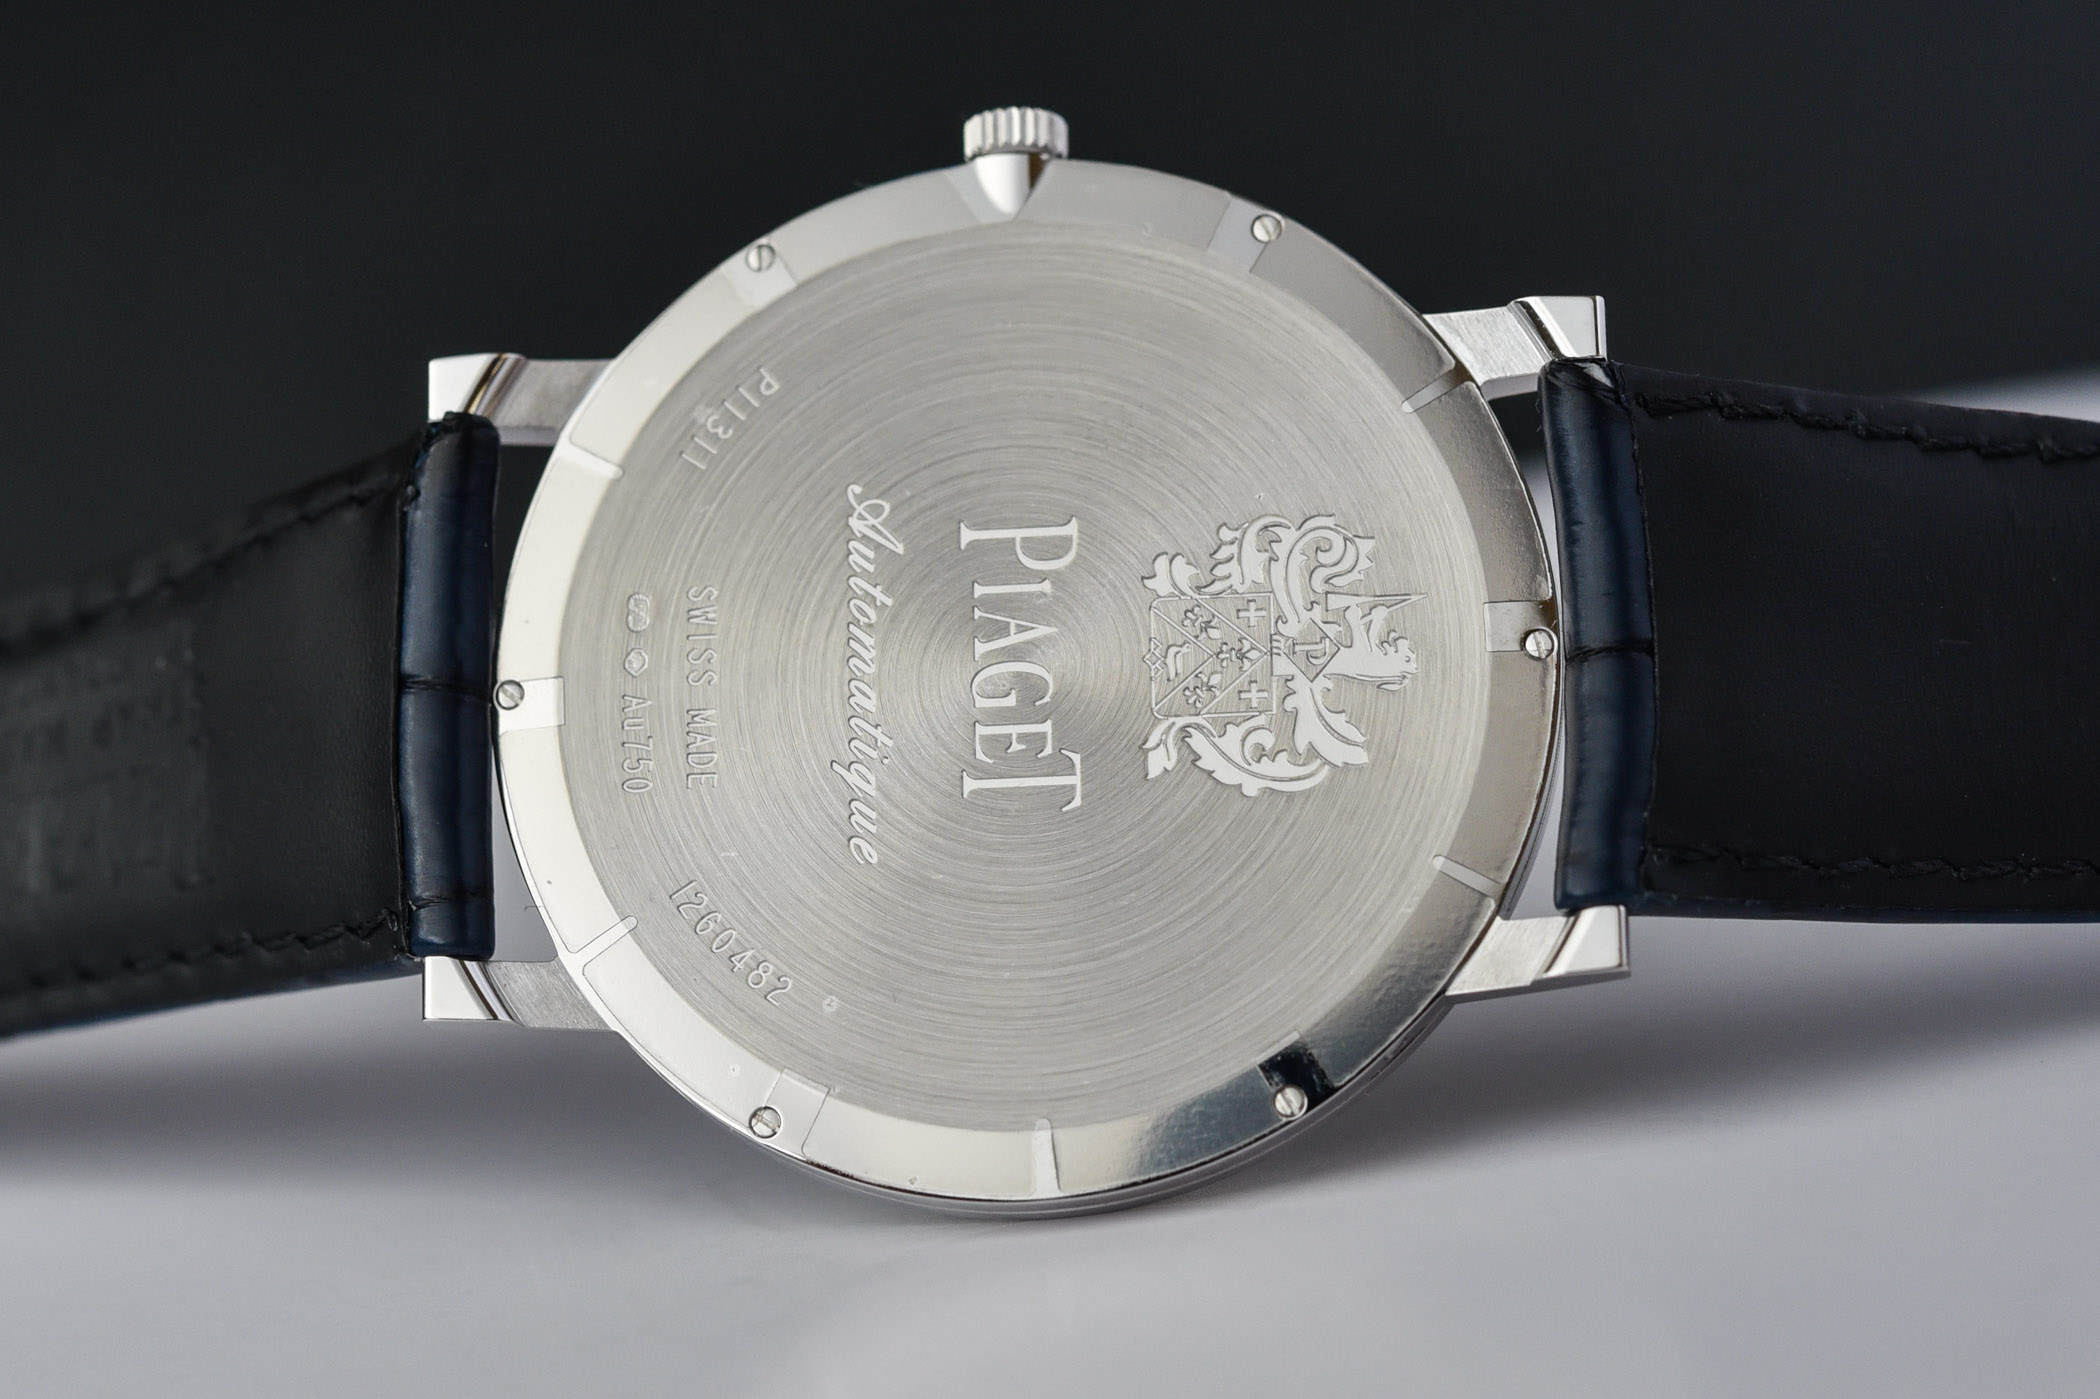 Piaget Altiplano Ultimate Automatic 910P White Gold Blue Dial G0A45123